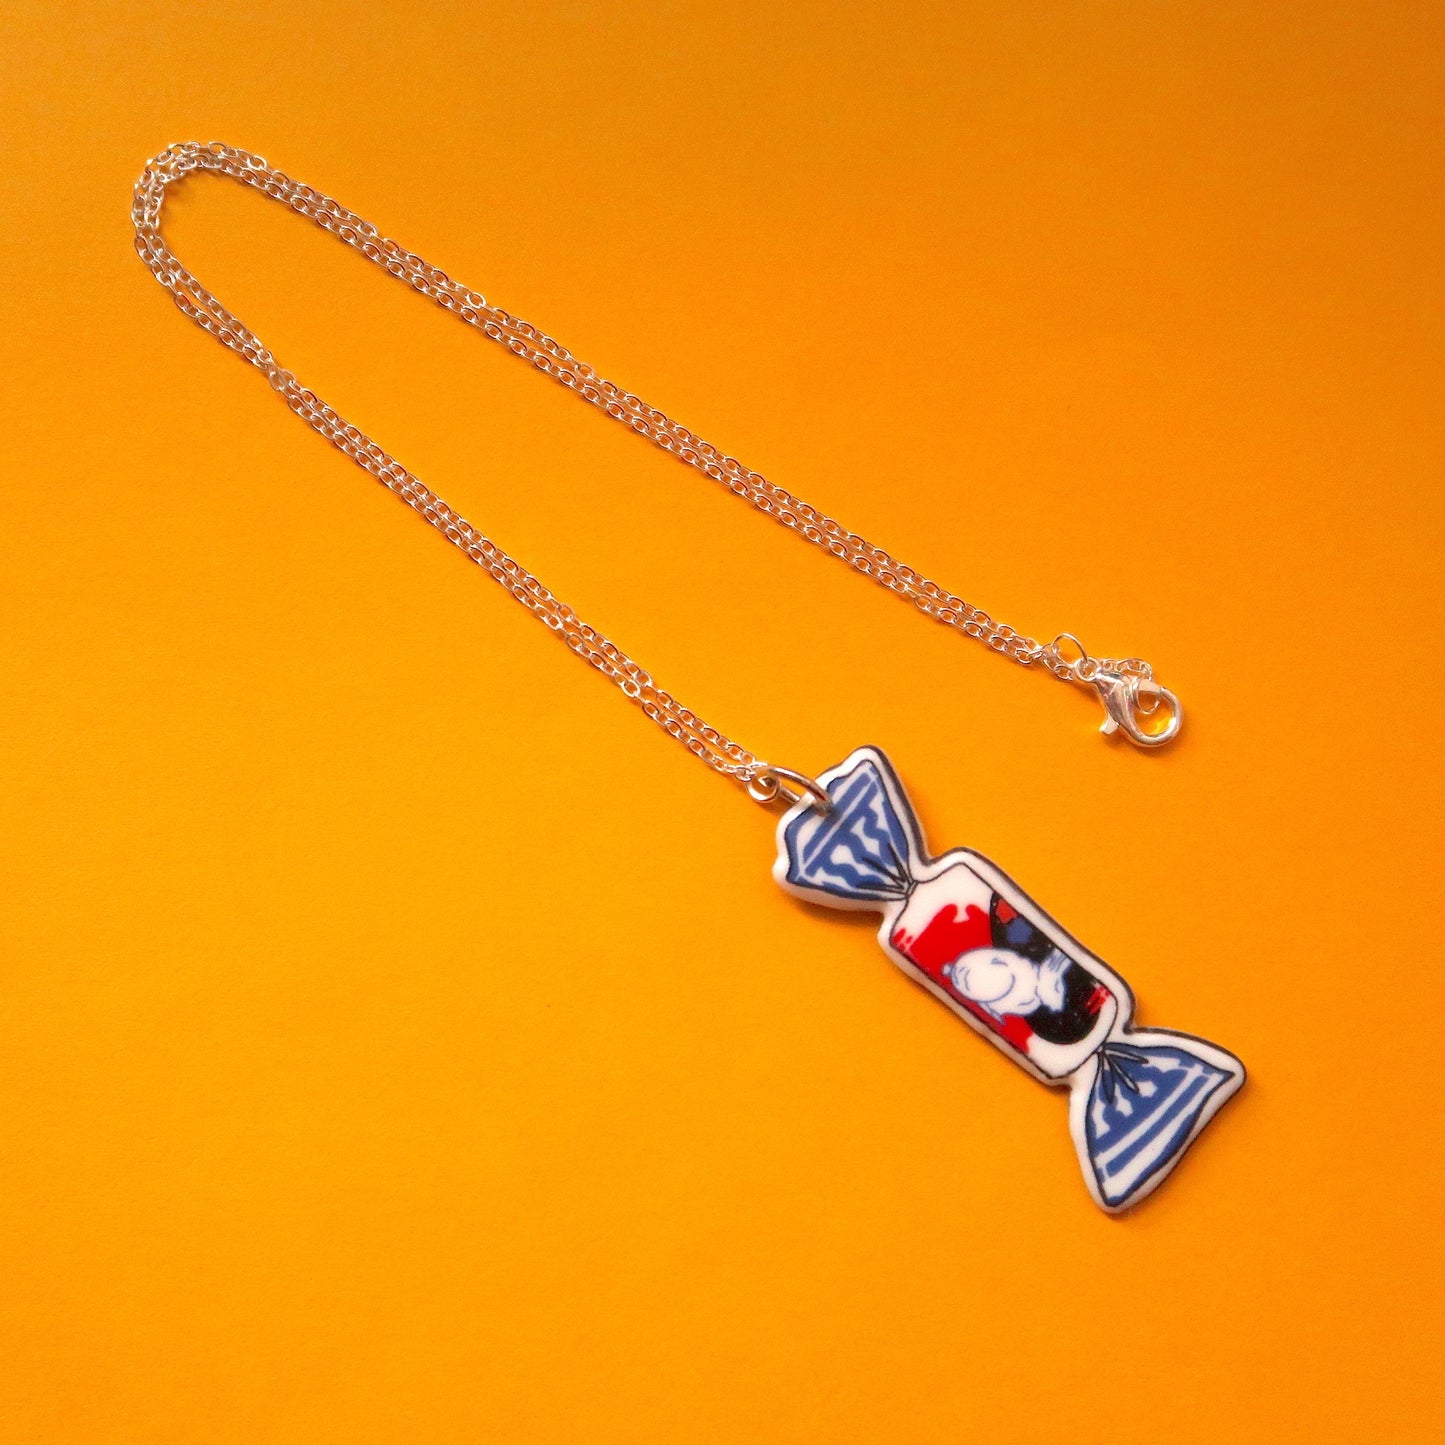 White Rabbit Candy Necklace